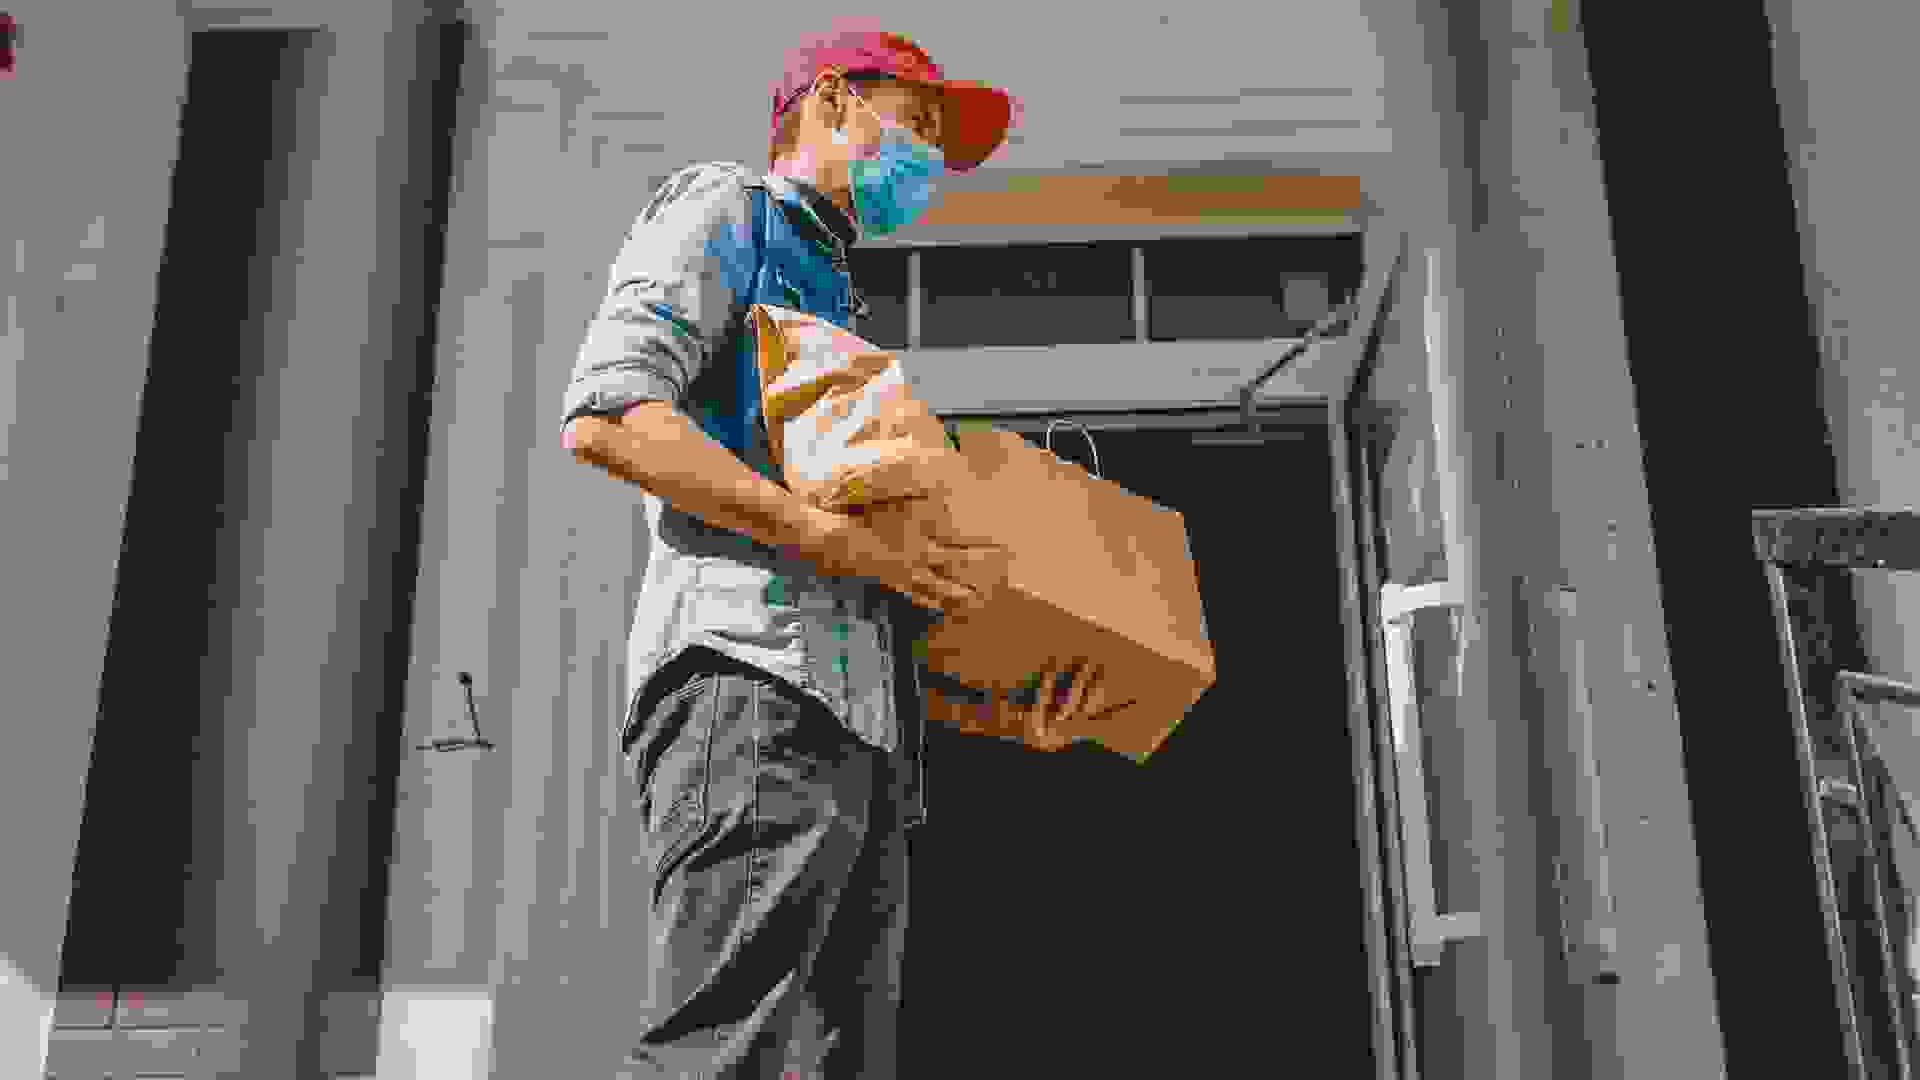 Delivery man holding paper bag with food on white entrance of house background , food delivery man in protective mask.